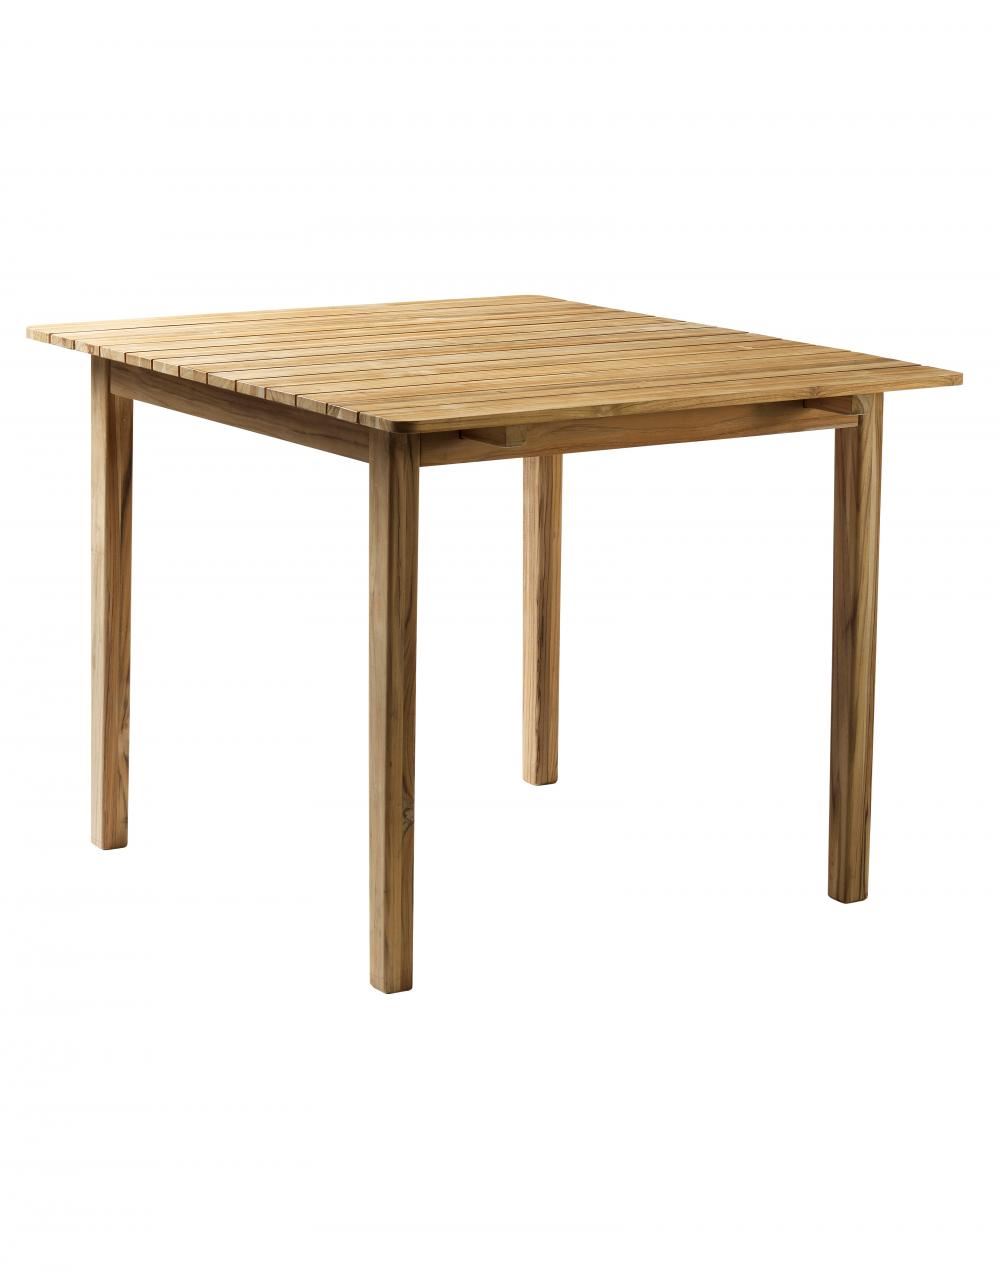 Fdb Mobler M3 Square Garden Table With Side Extension Leaf Light Wood Designer Furniture From Holloways Of Ludlow